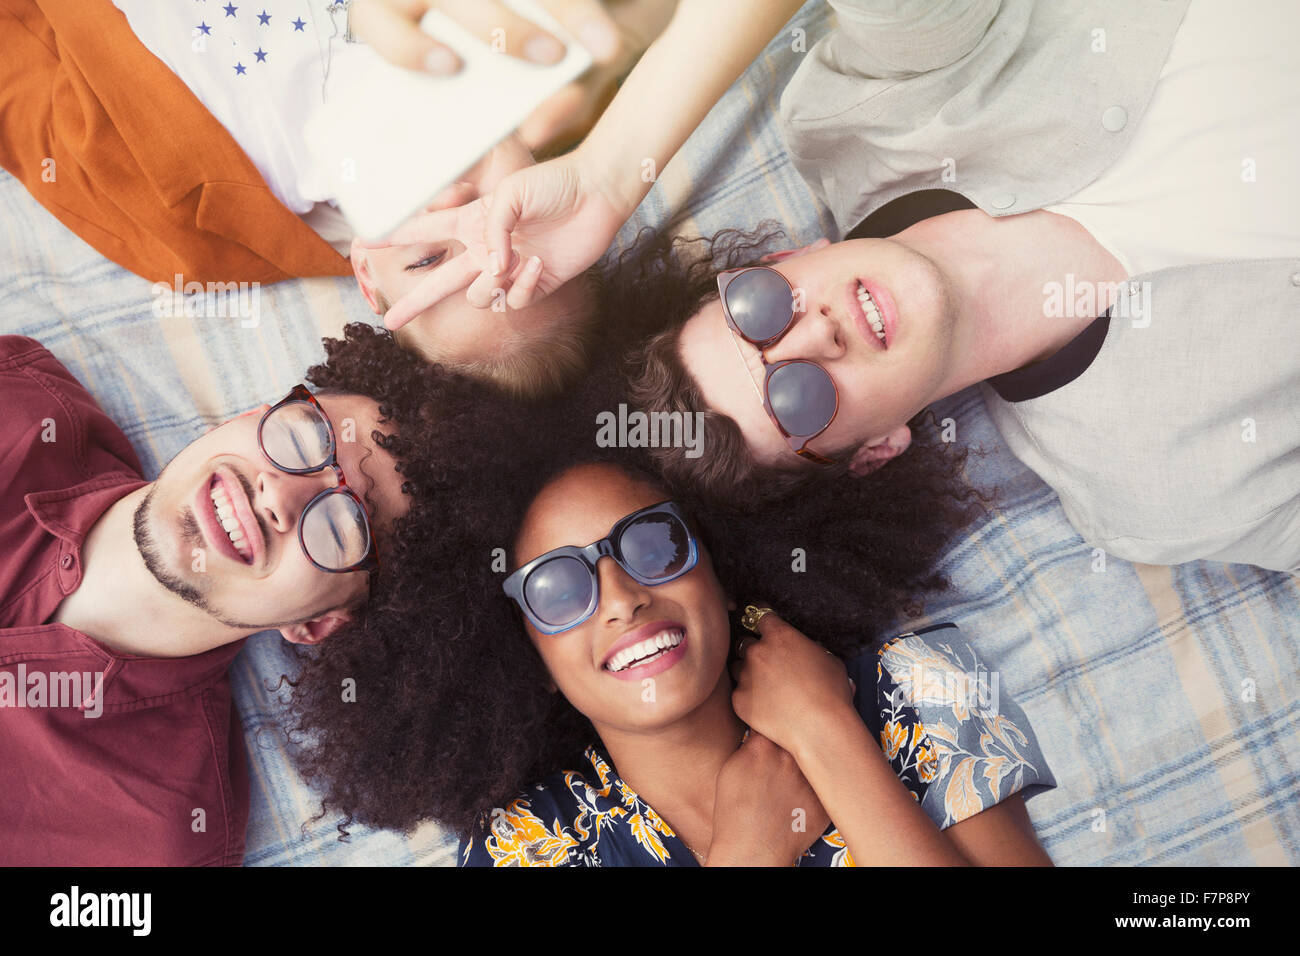 Overhead portrait smiling friends laying in circle on blanket Stock Photo